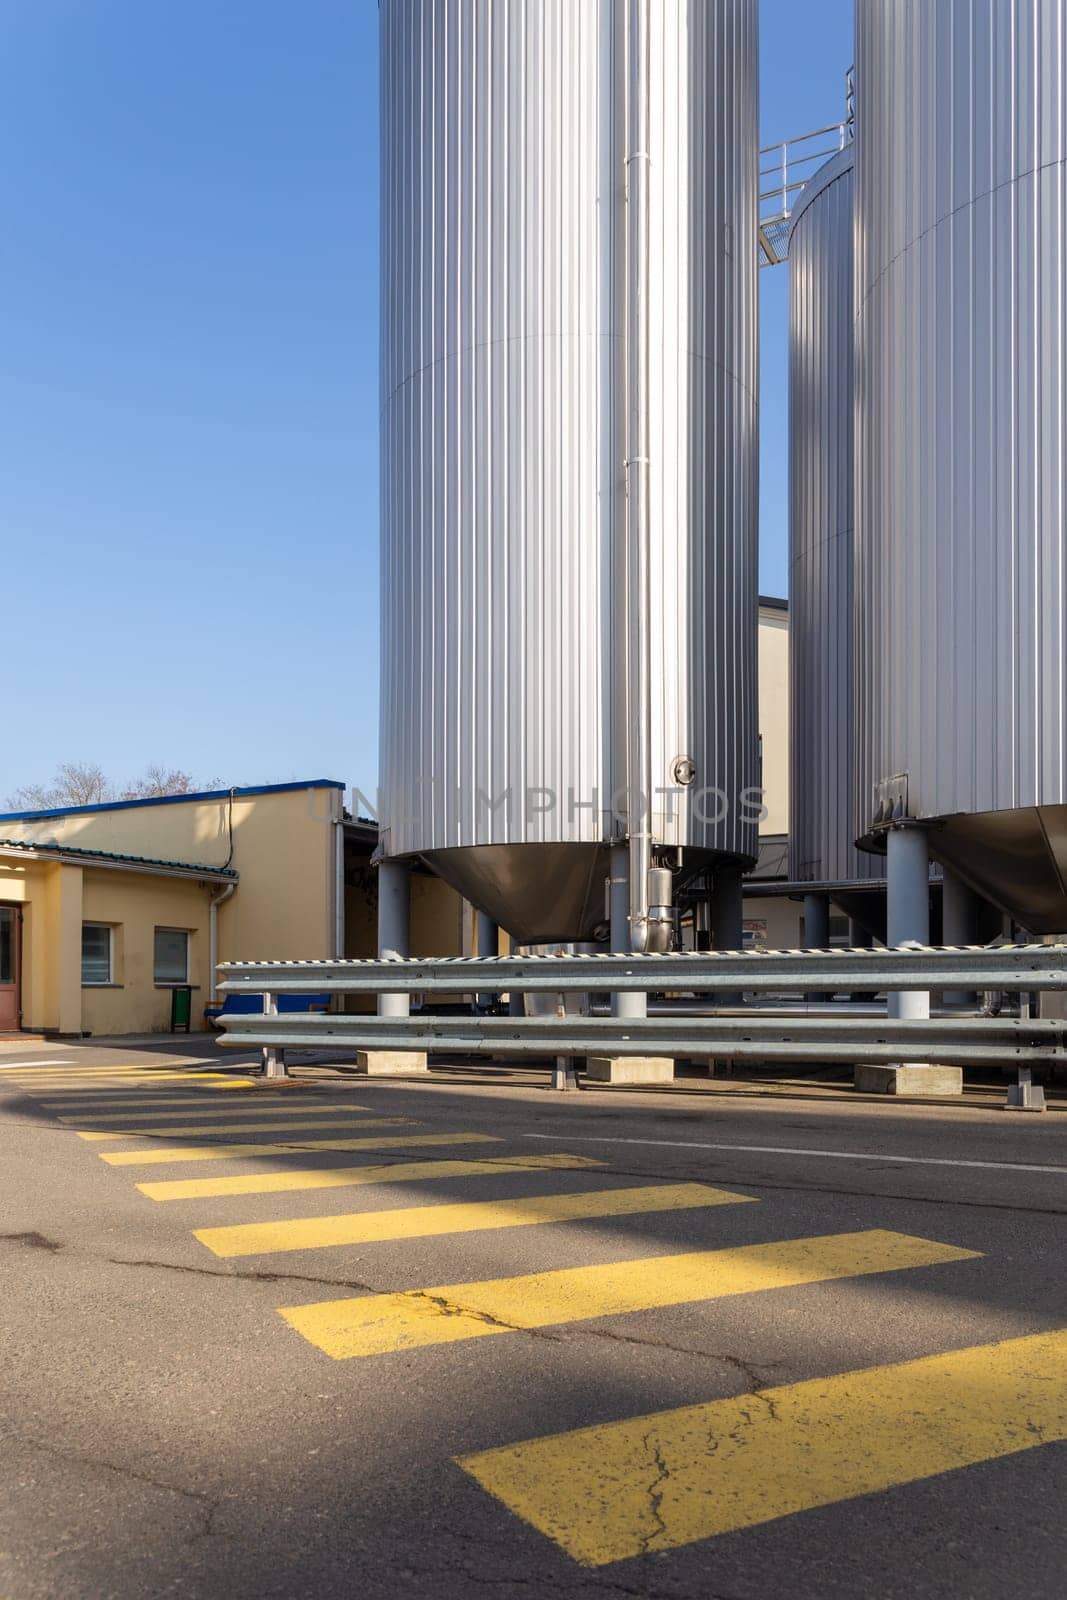 Brewery silos or tanks typically use for storing barley or fermented beer. by BY-_-BY